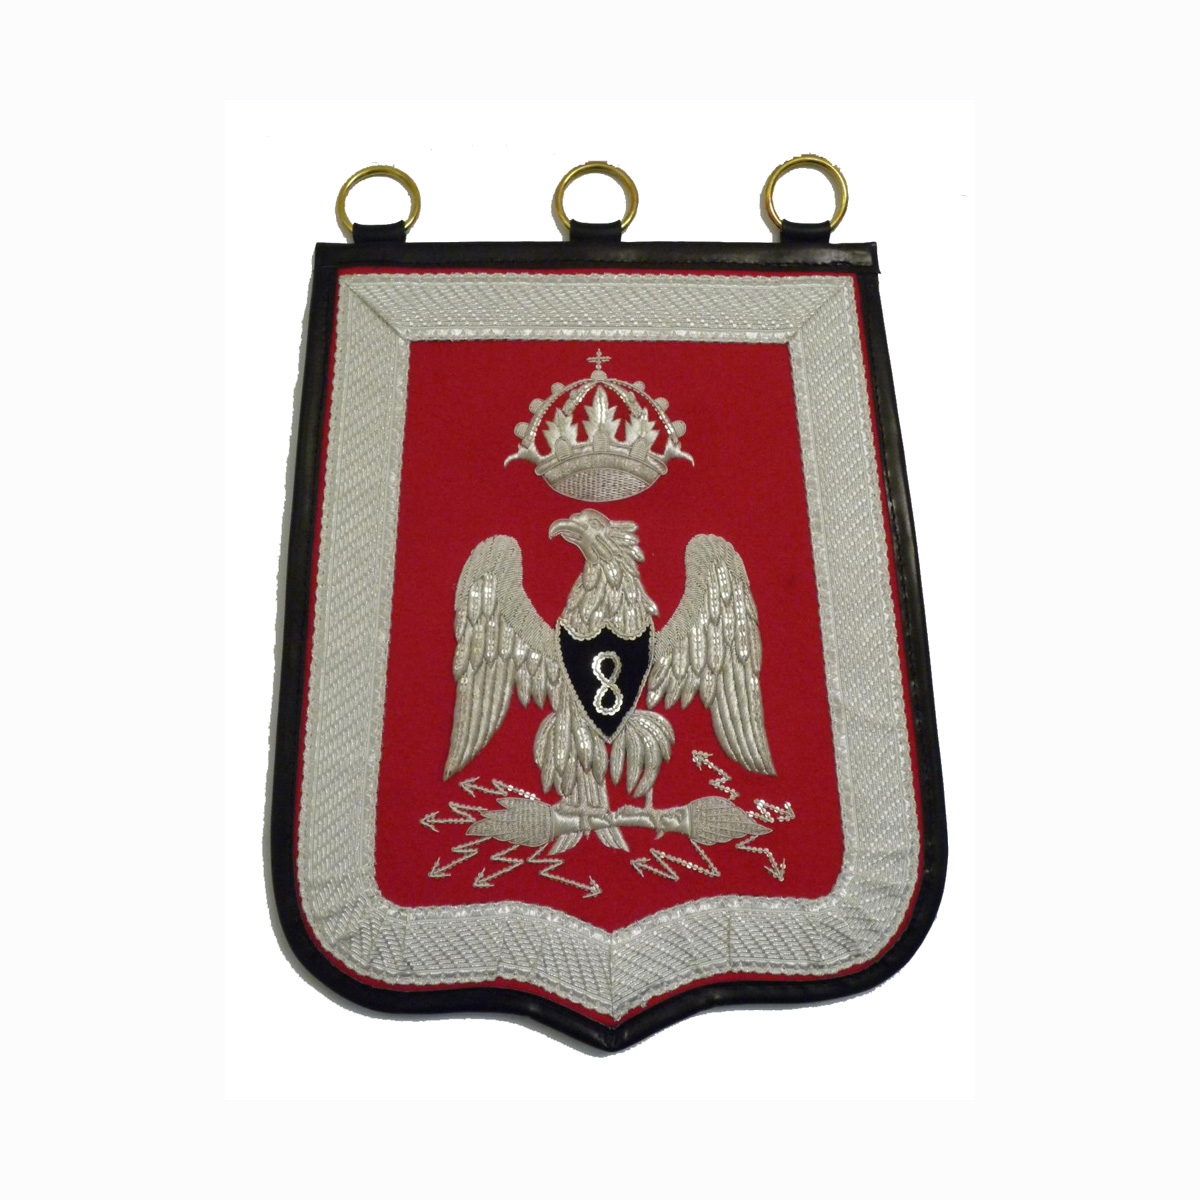 Sabretache of 8th hussar - flag silver color embroidered handmade bullion wire Hand Knitted Supplier